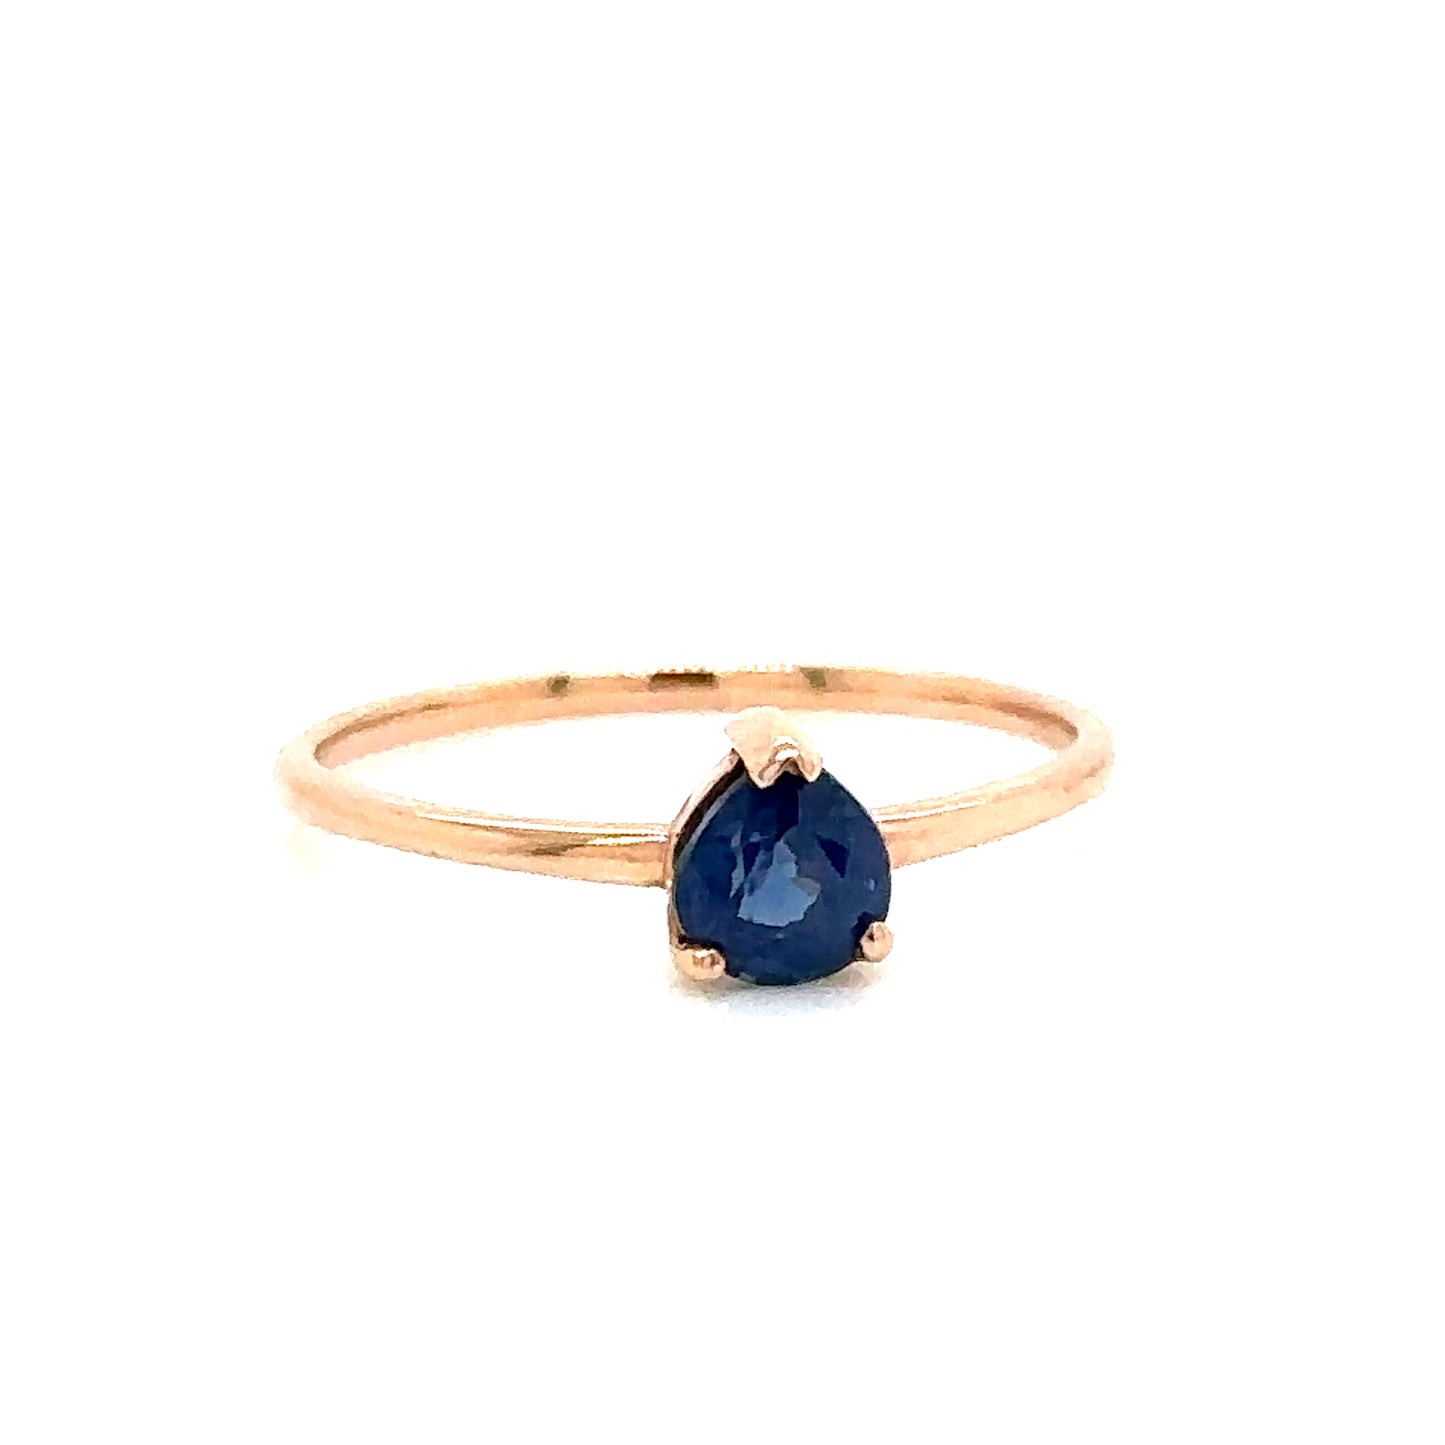 IMMEDIATE DELIVERY / Drop cut Sapphire Ring / 14k rose gold / size 7.25